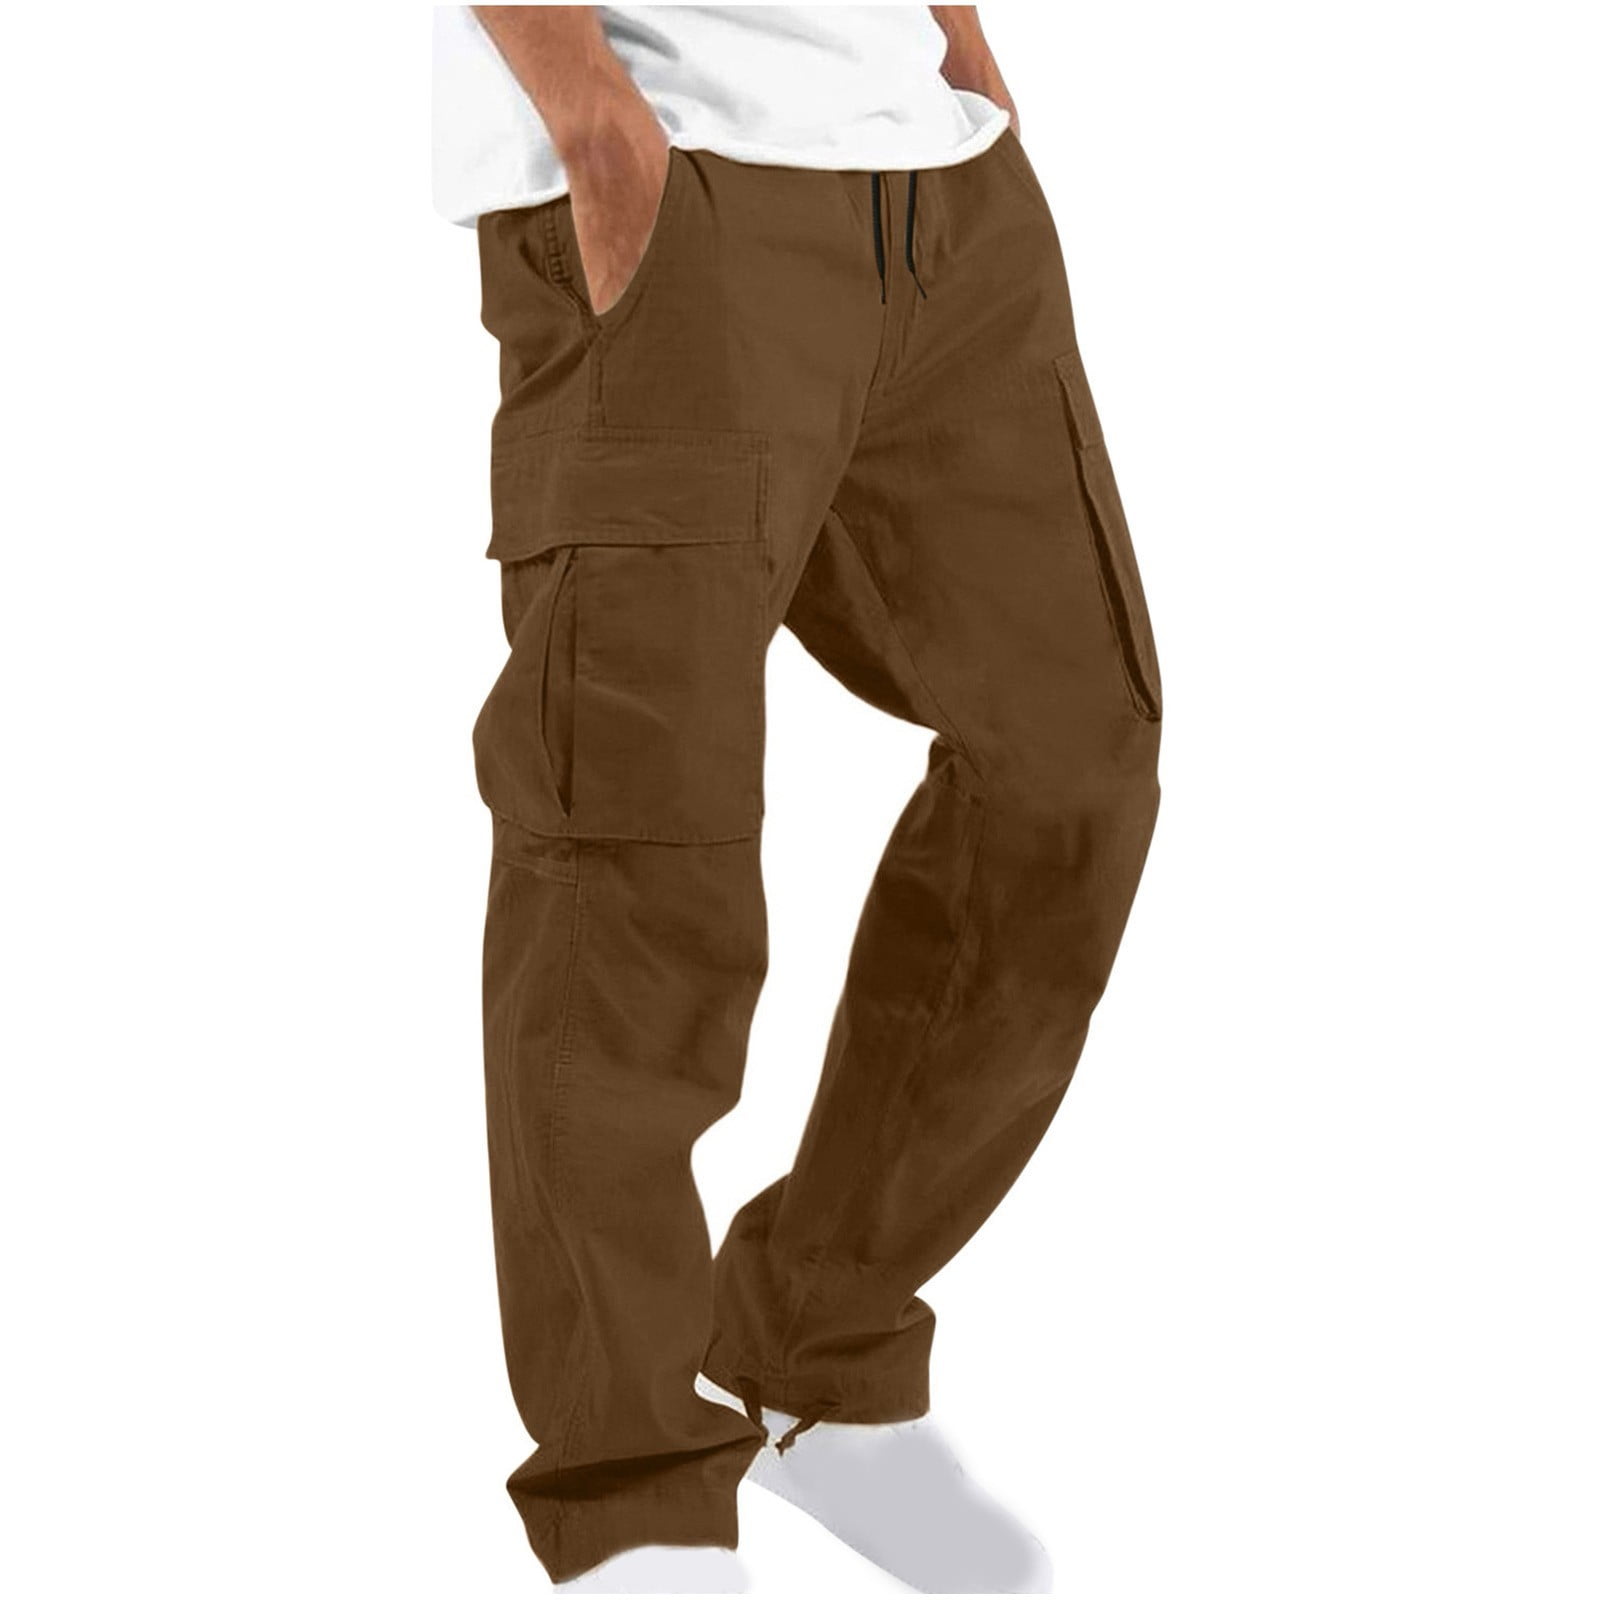 Clearance Cargo Pants for Men Relaxed Fit with Pockets Baggy Big and Tall Cargo  Pants Lightweight Rip Stop Outdoor Casual Straight Leg Pants 